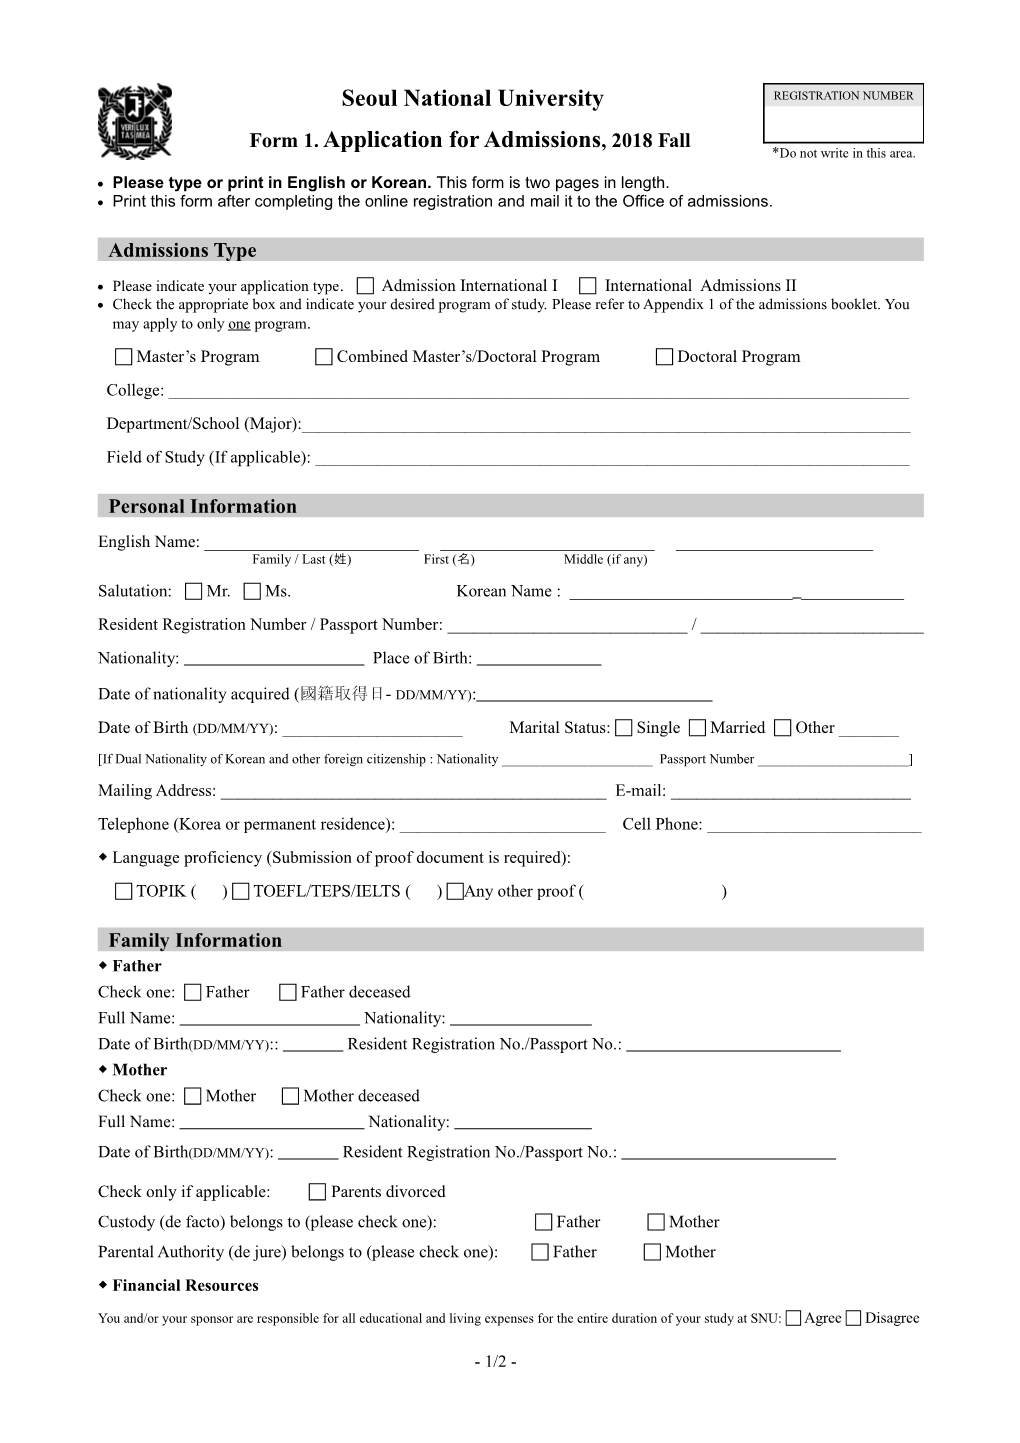 Form 1. Application for Admissions, 2018 Fall